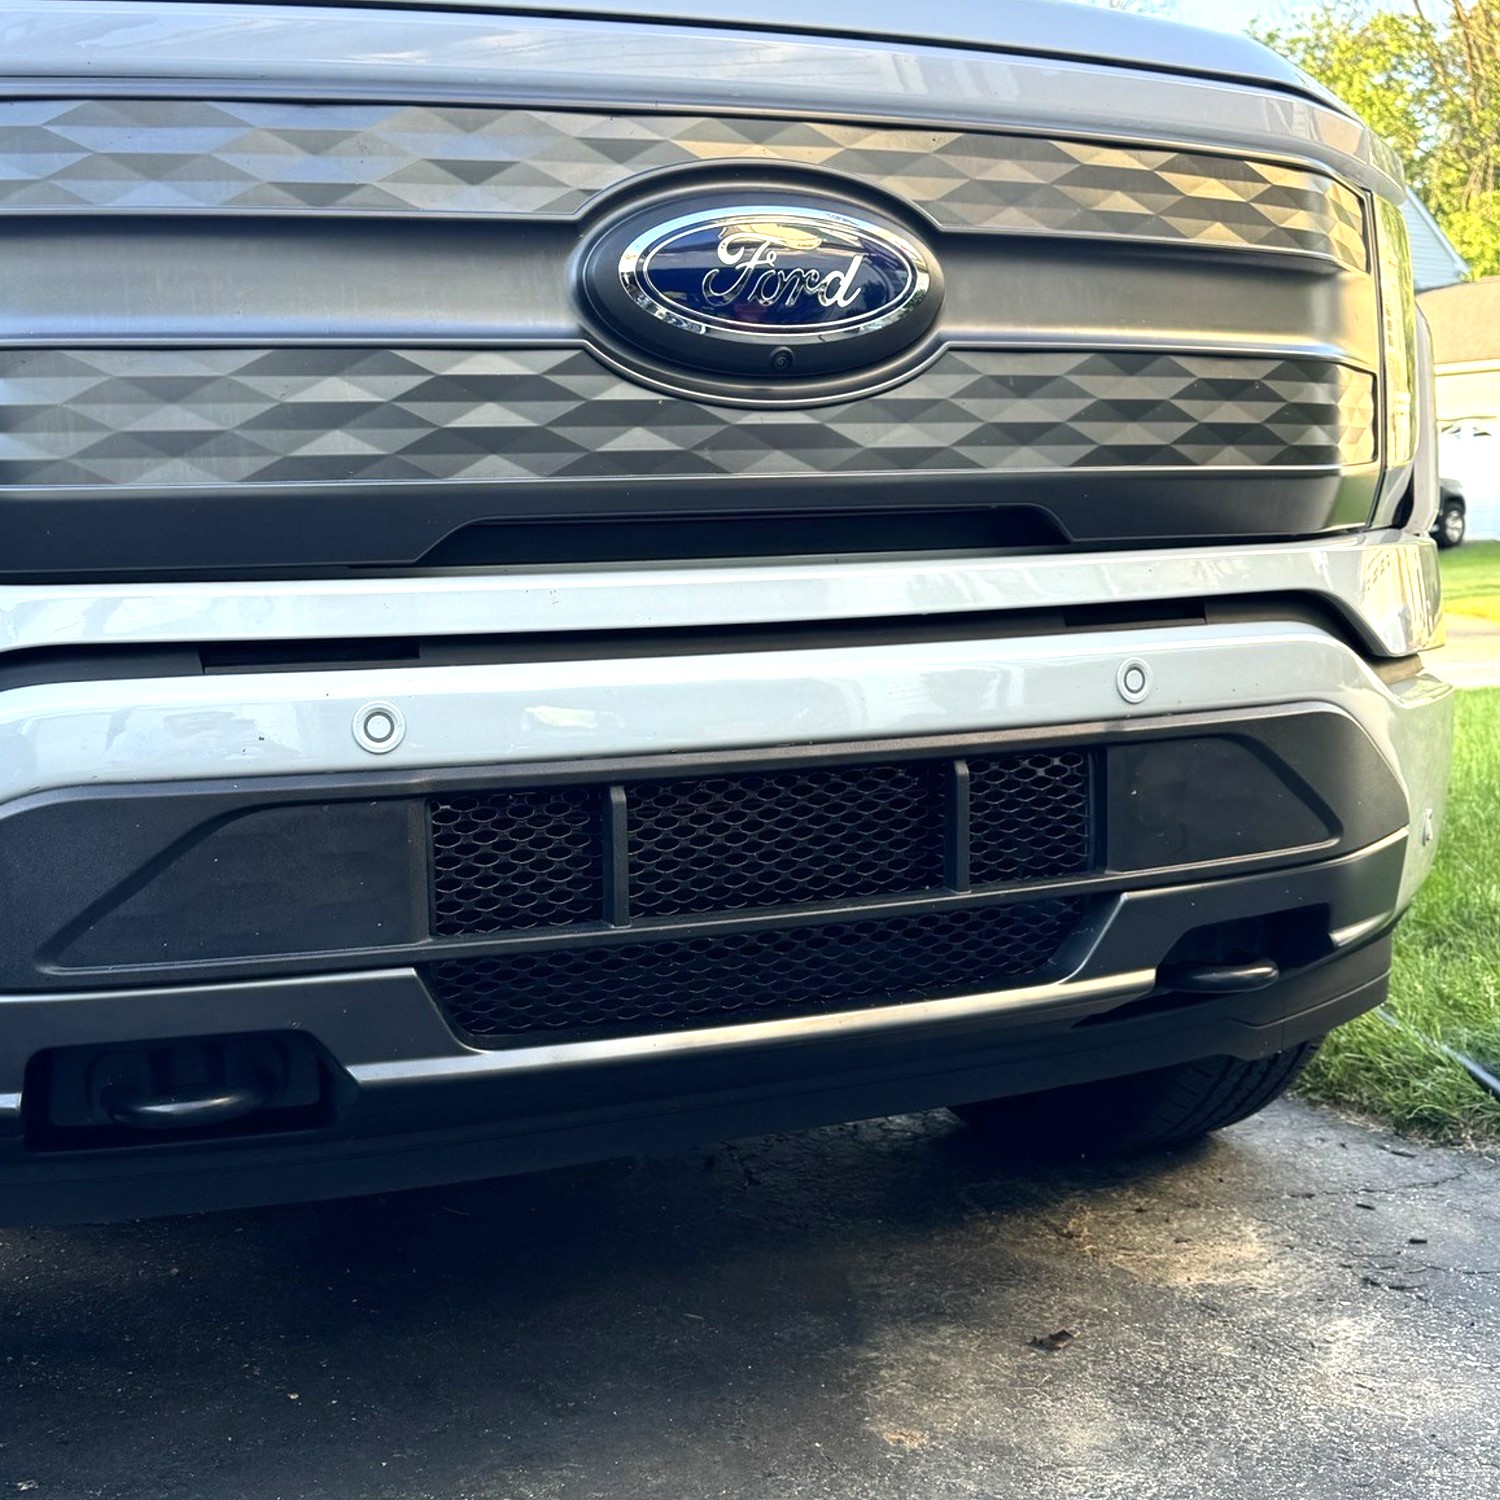 Ford F150 Lightning - Electric Trucks Bringing a New Era of Grilles to our website